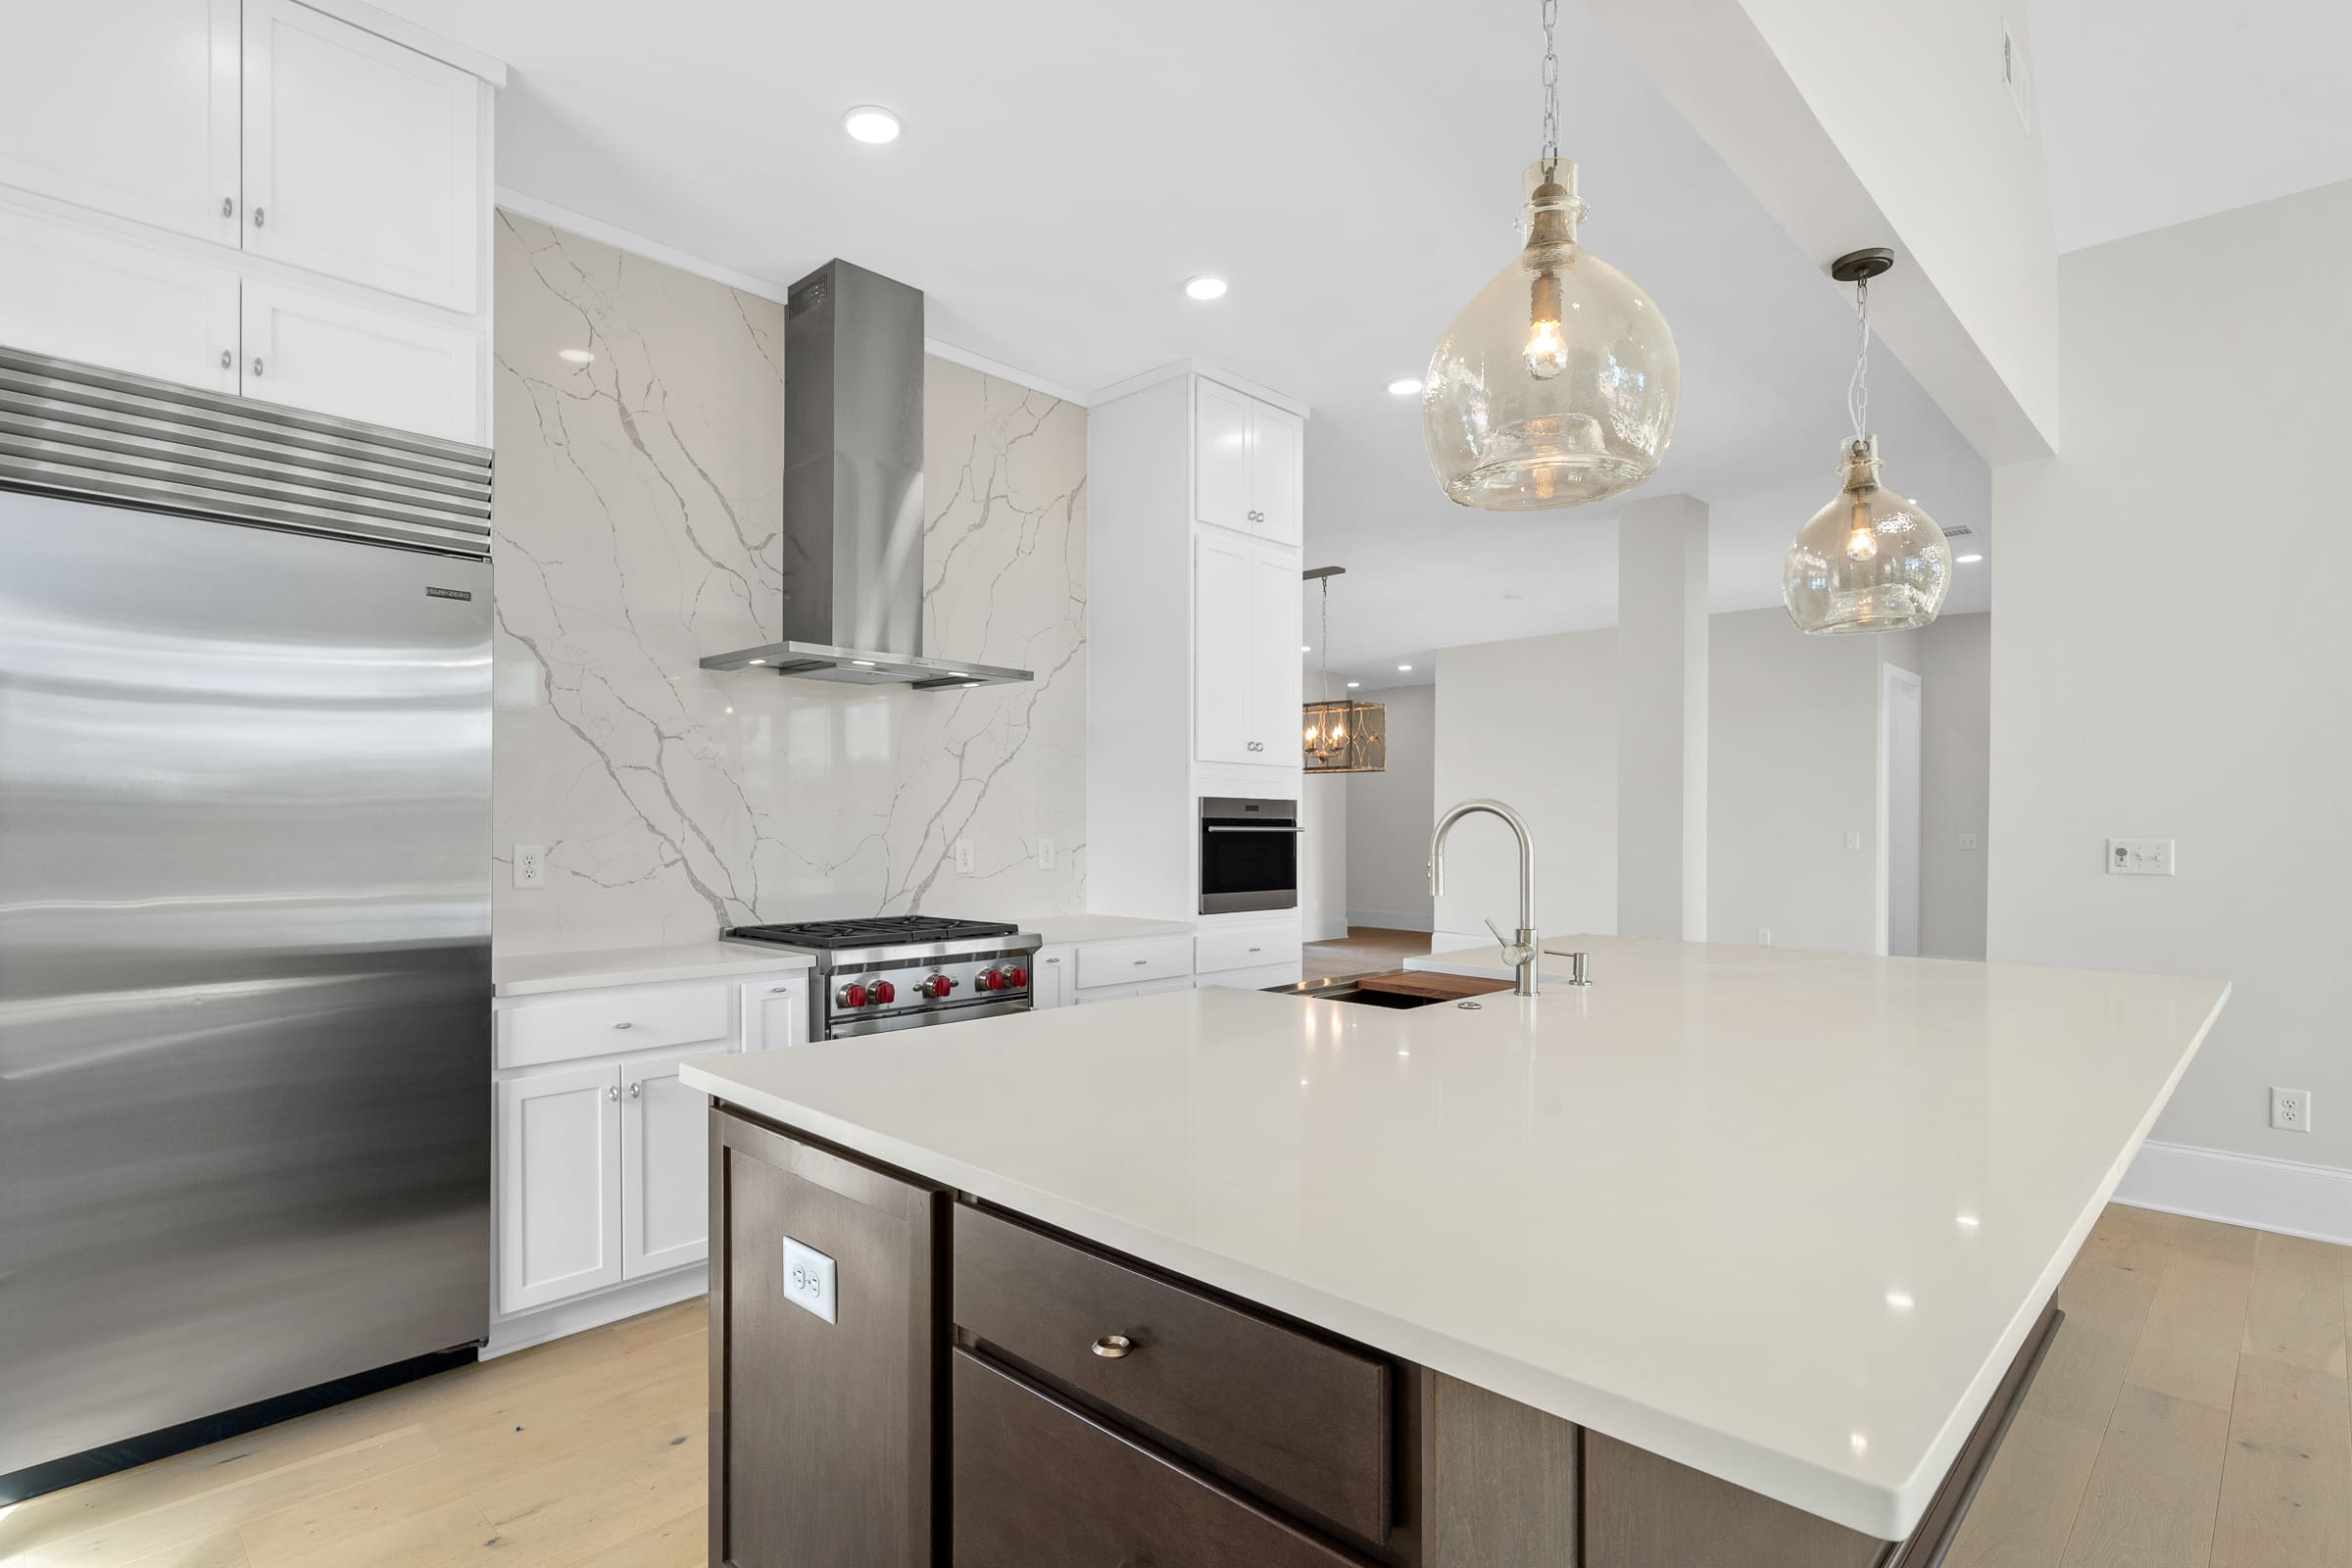 Large Open Kitchen with White Accents and Stainless Steel Appliances |PAXISgroup